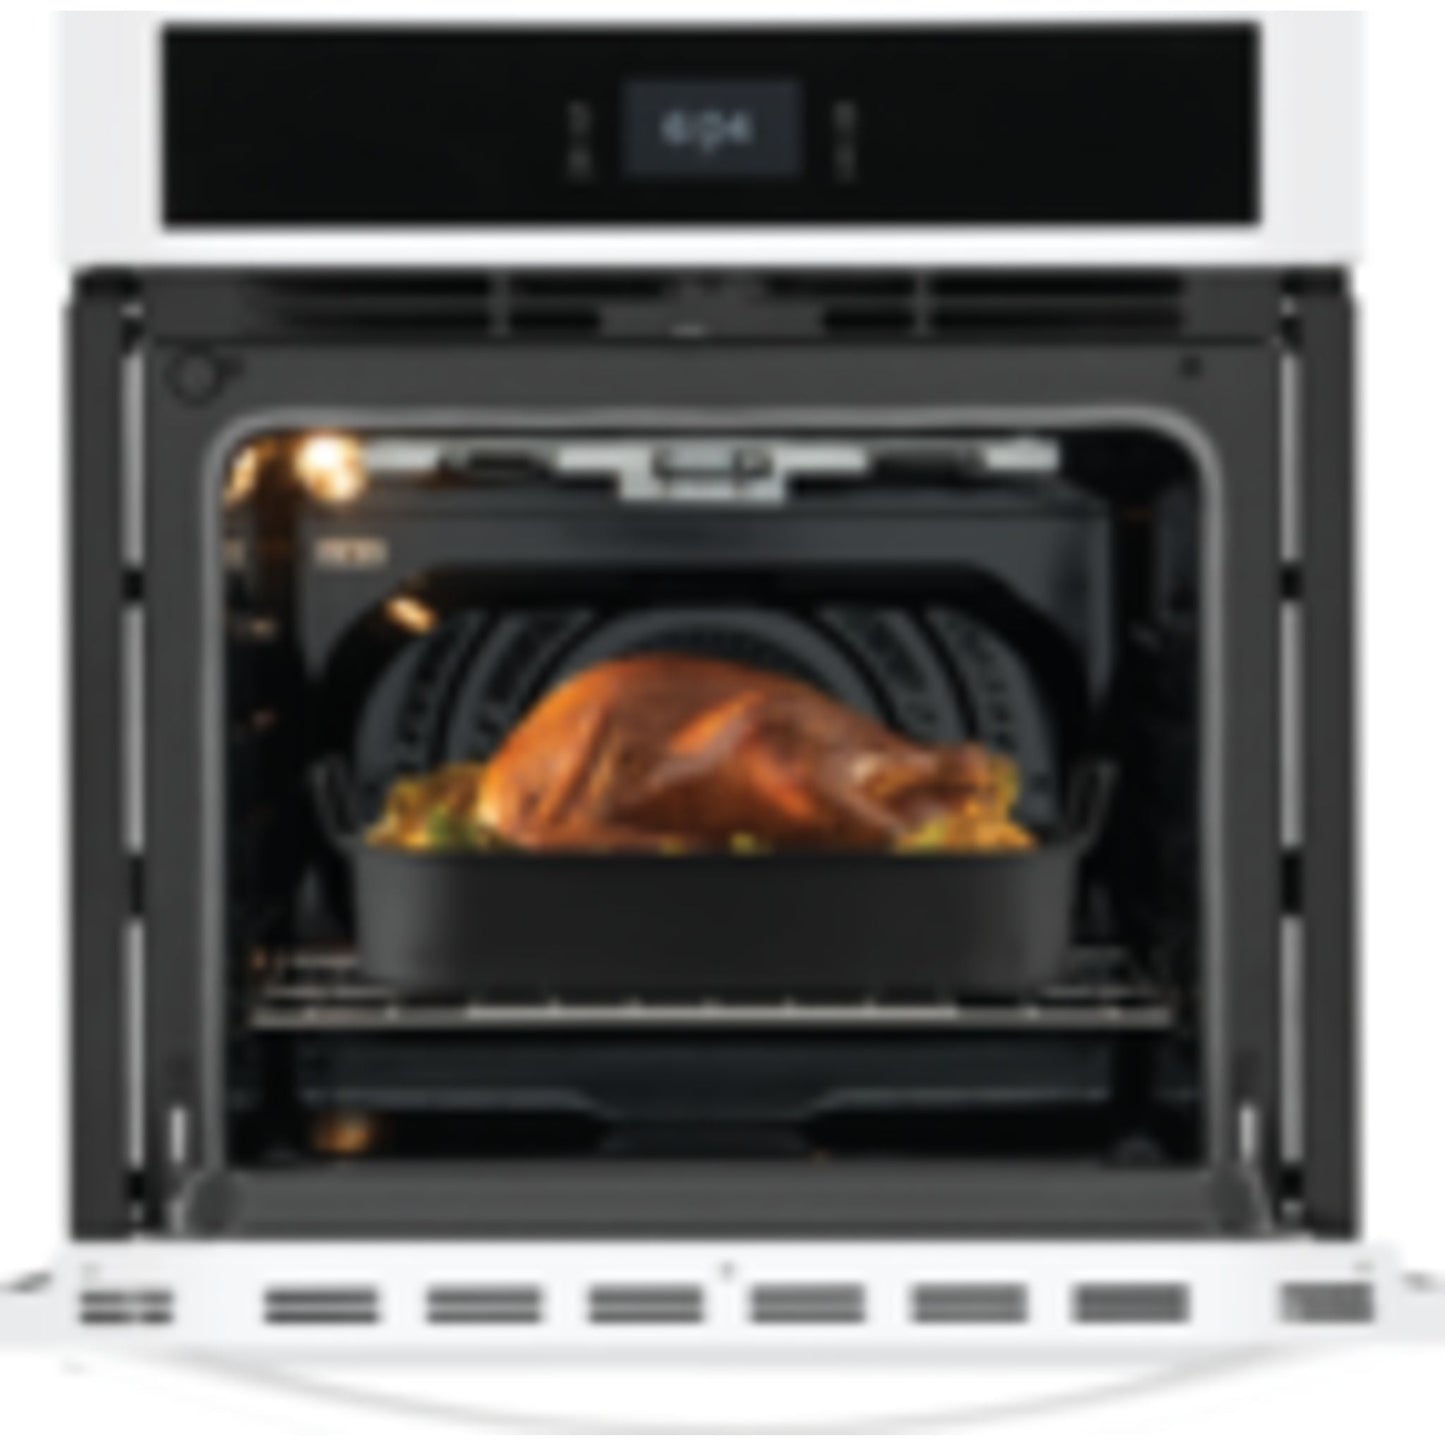 Frigidaire 27" Convection Wall Oven (FCWS2727AW) - White